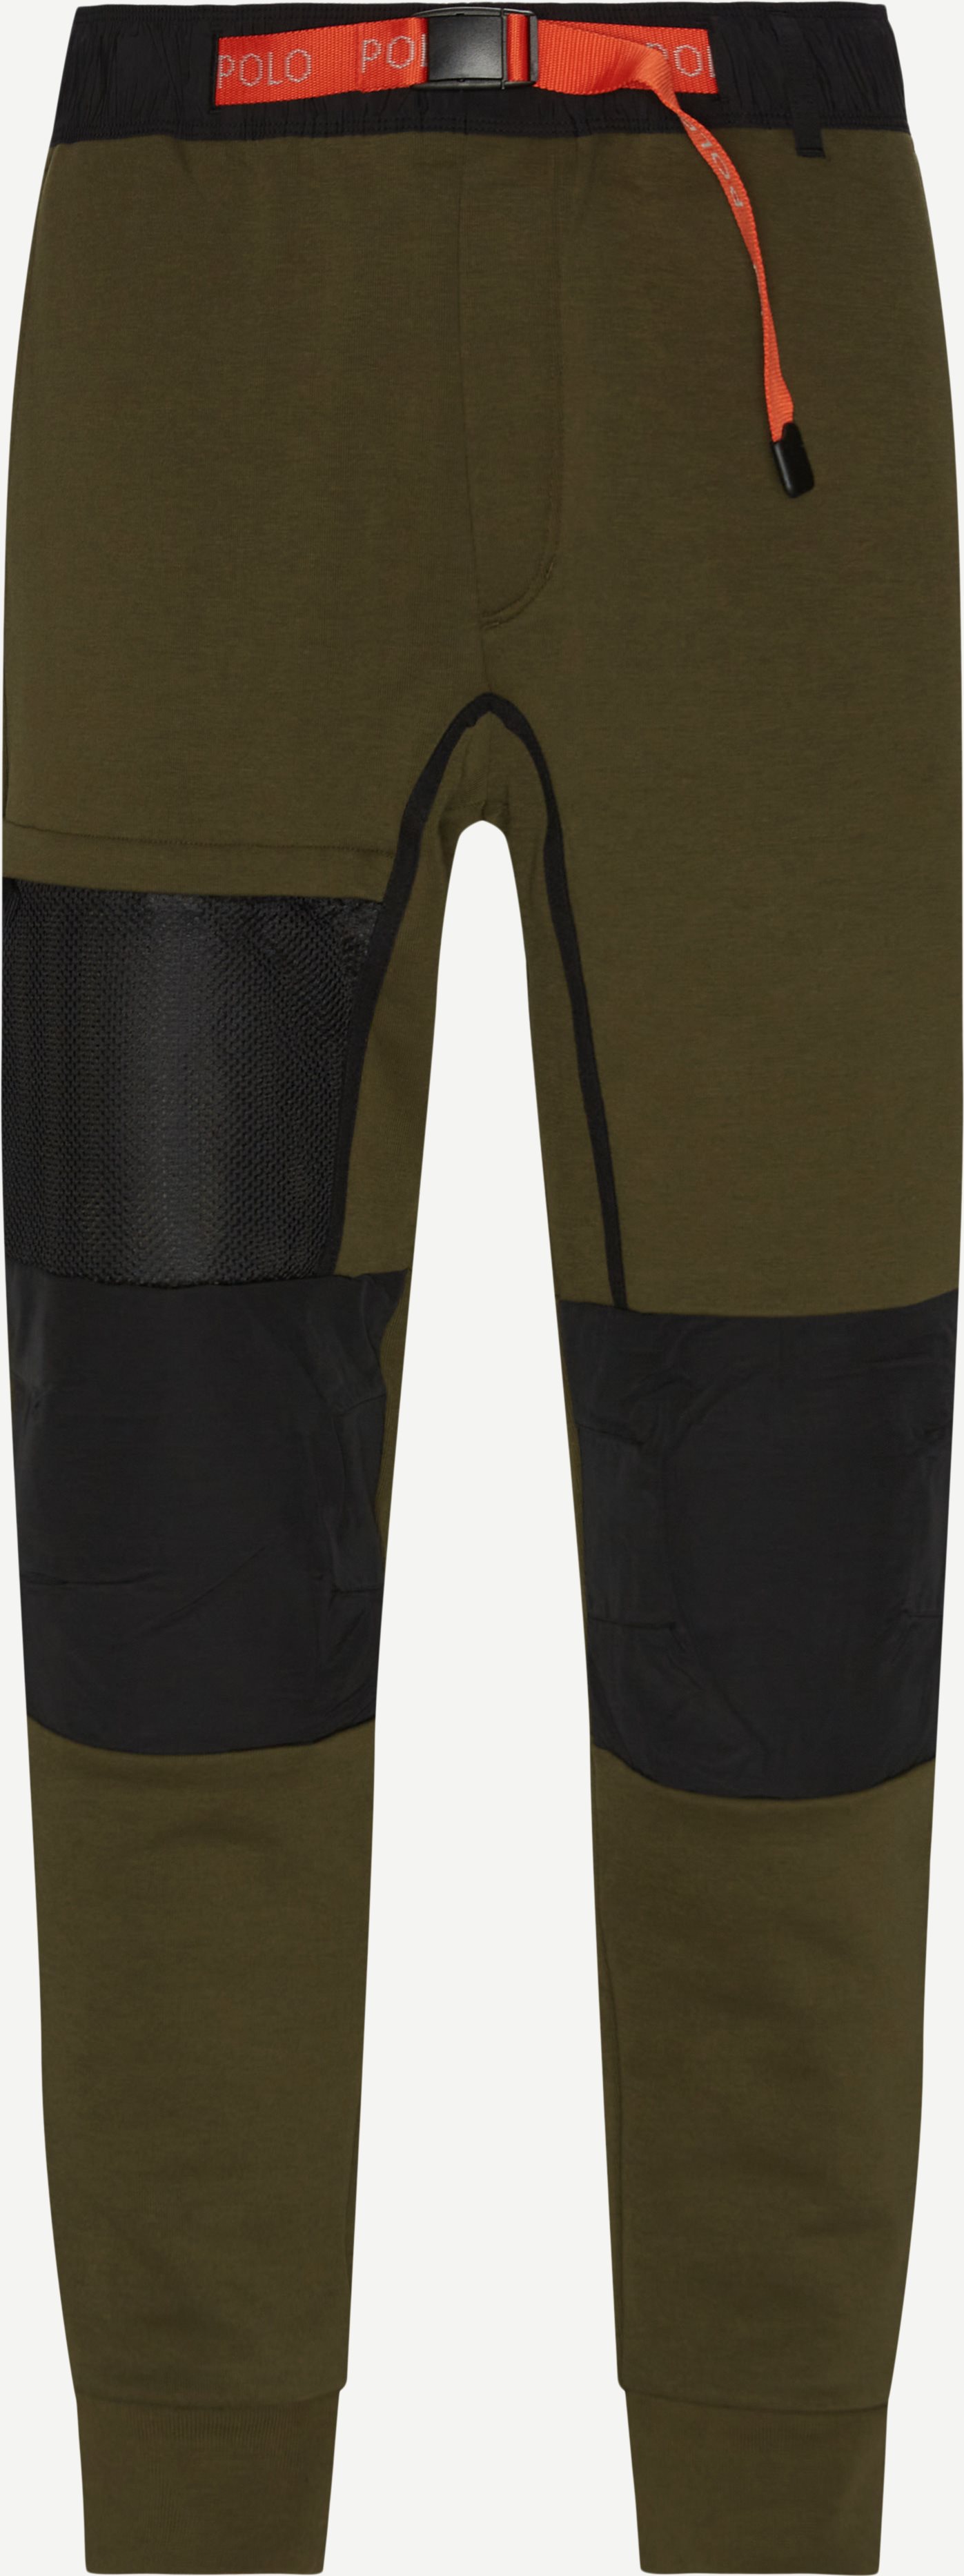 Polo Ralph Lauren Trousers 710849542 Army